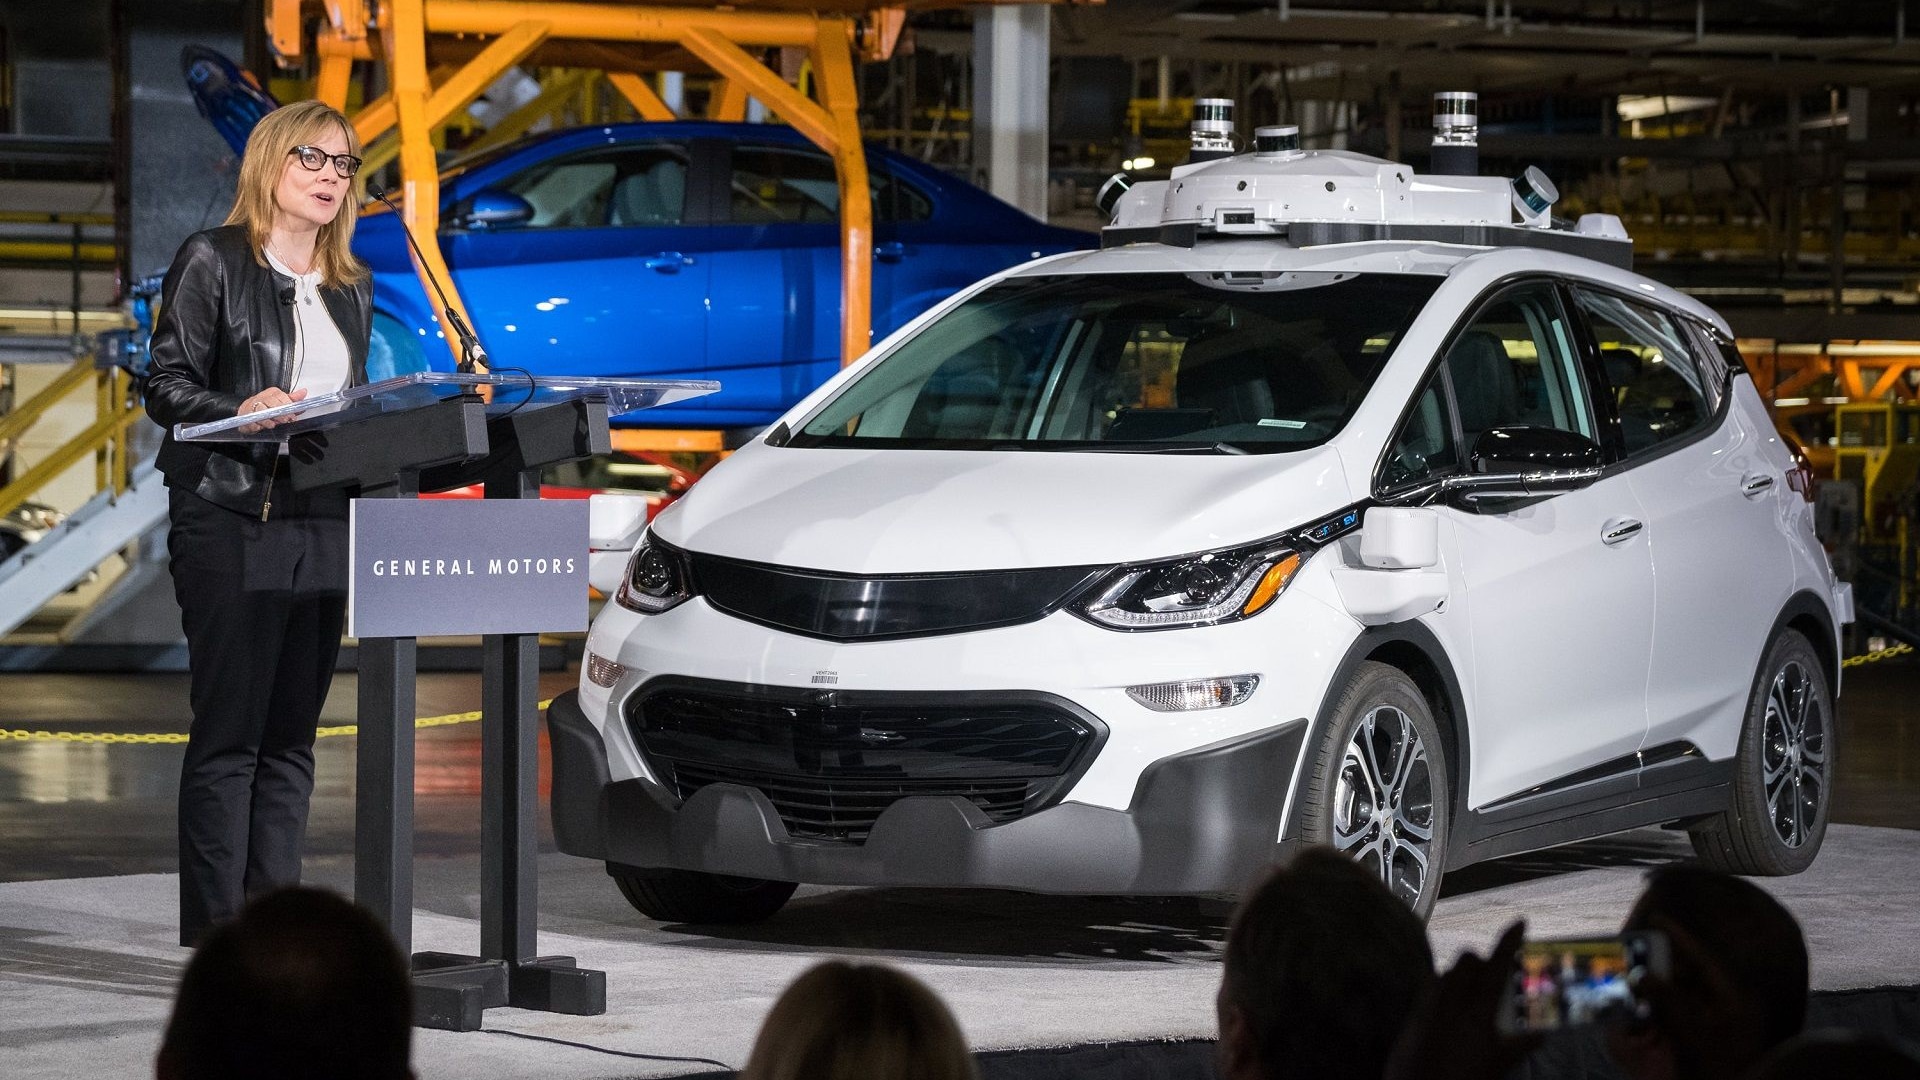 One of 130 second-generation self-driving Chevrolet Bolt EV electric cars, with GM CEO Mary Barra